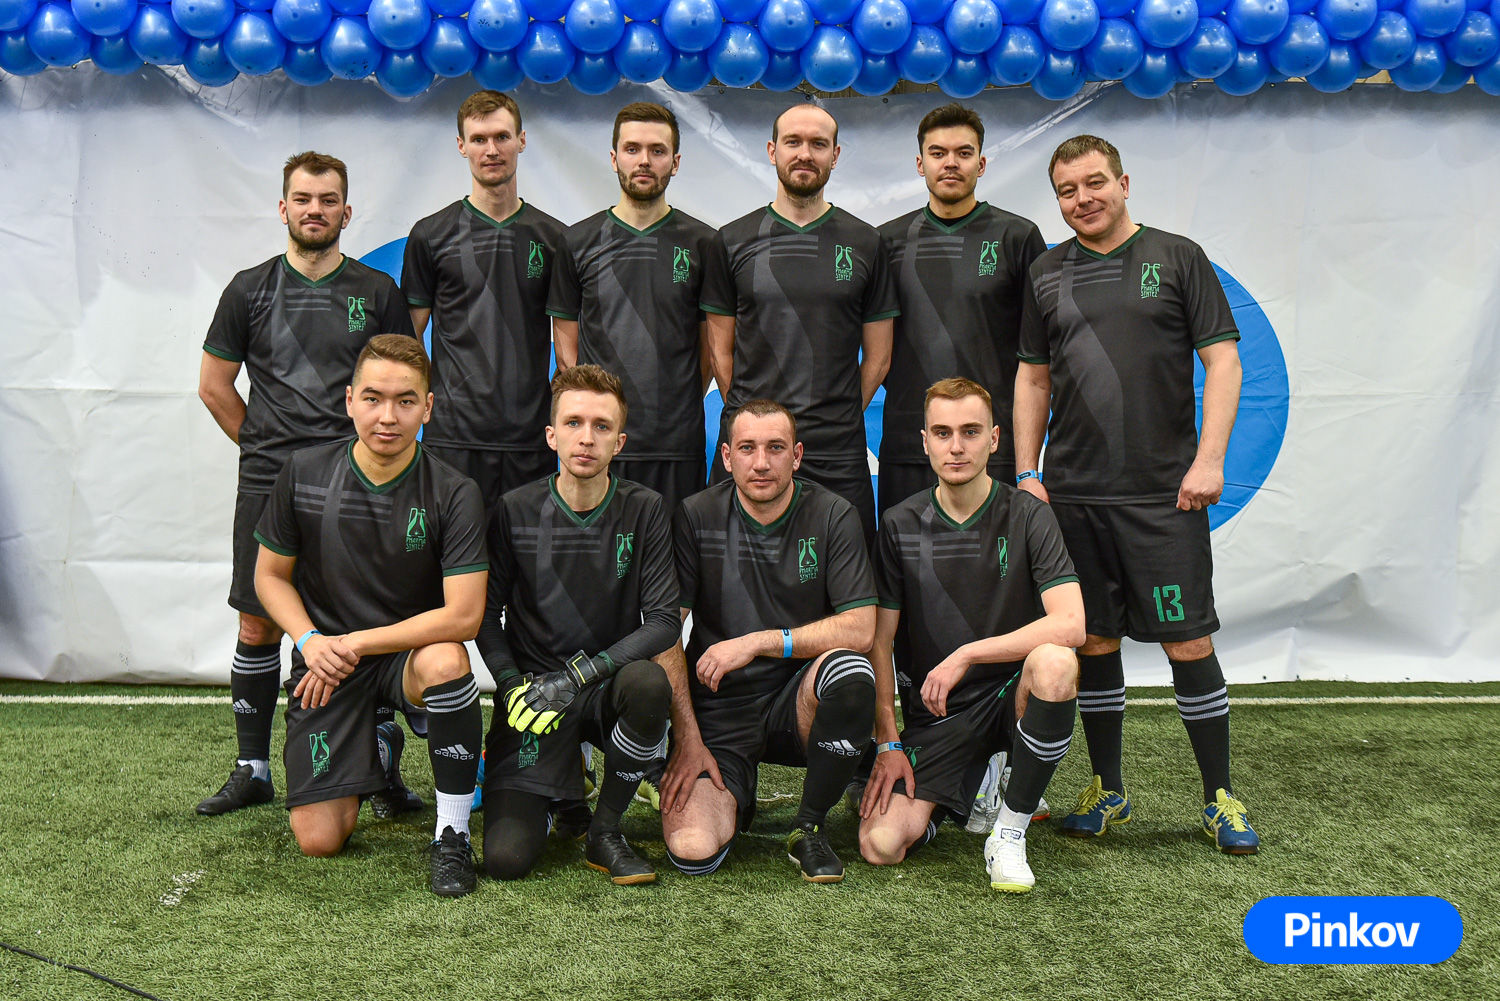 Congratulations to the Pharmasyntez Football Team on the fourth place at Silver CUP “Science and MedPharm 2022” tournament